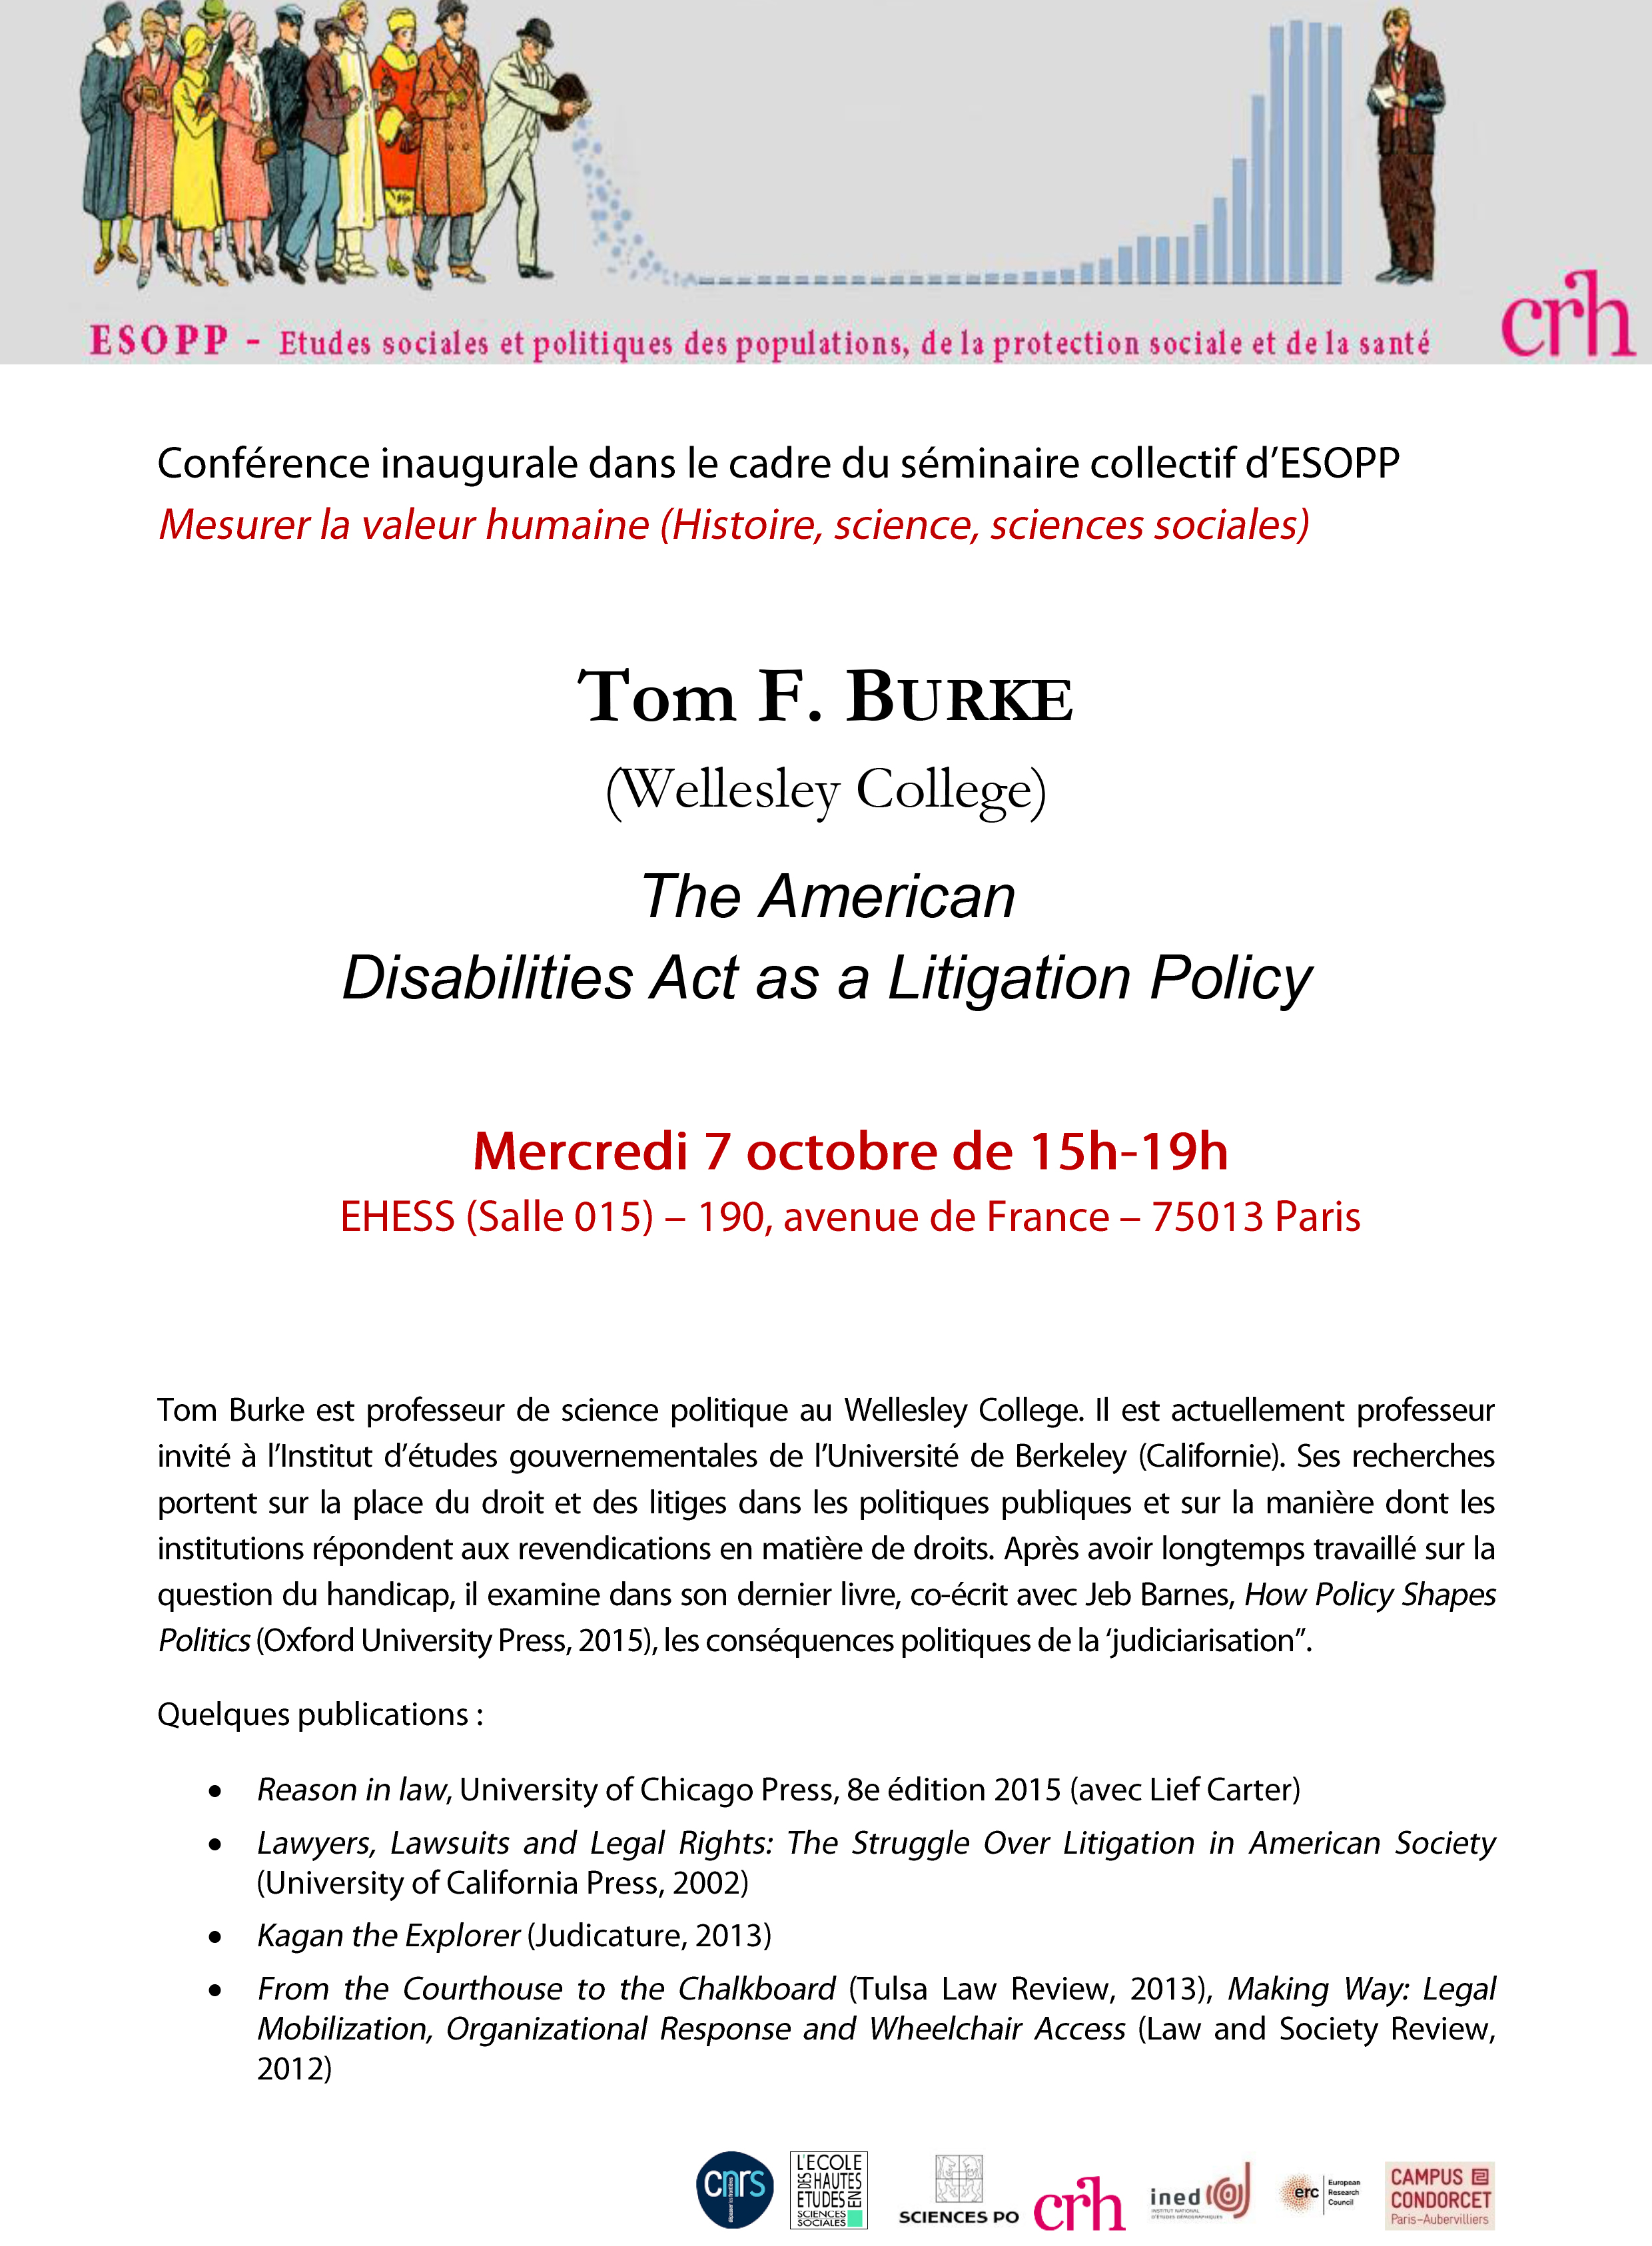 Conférence de Tom Burke : The American Disabilities Act as a Litigation Policy